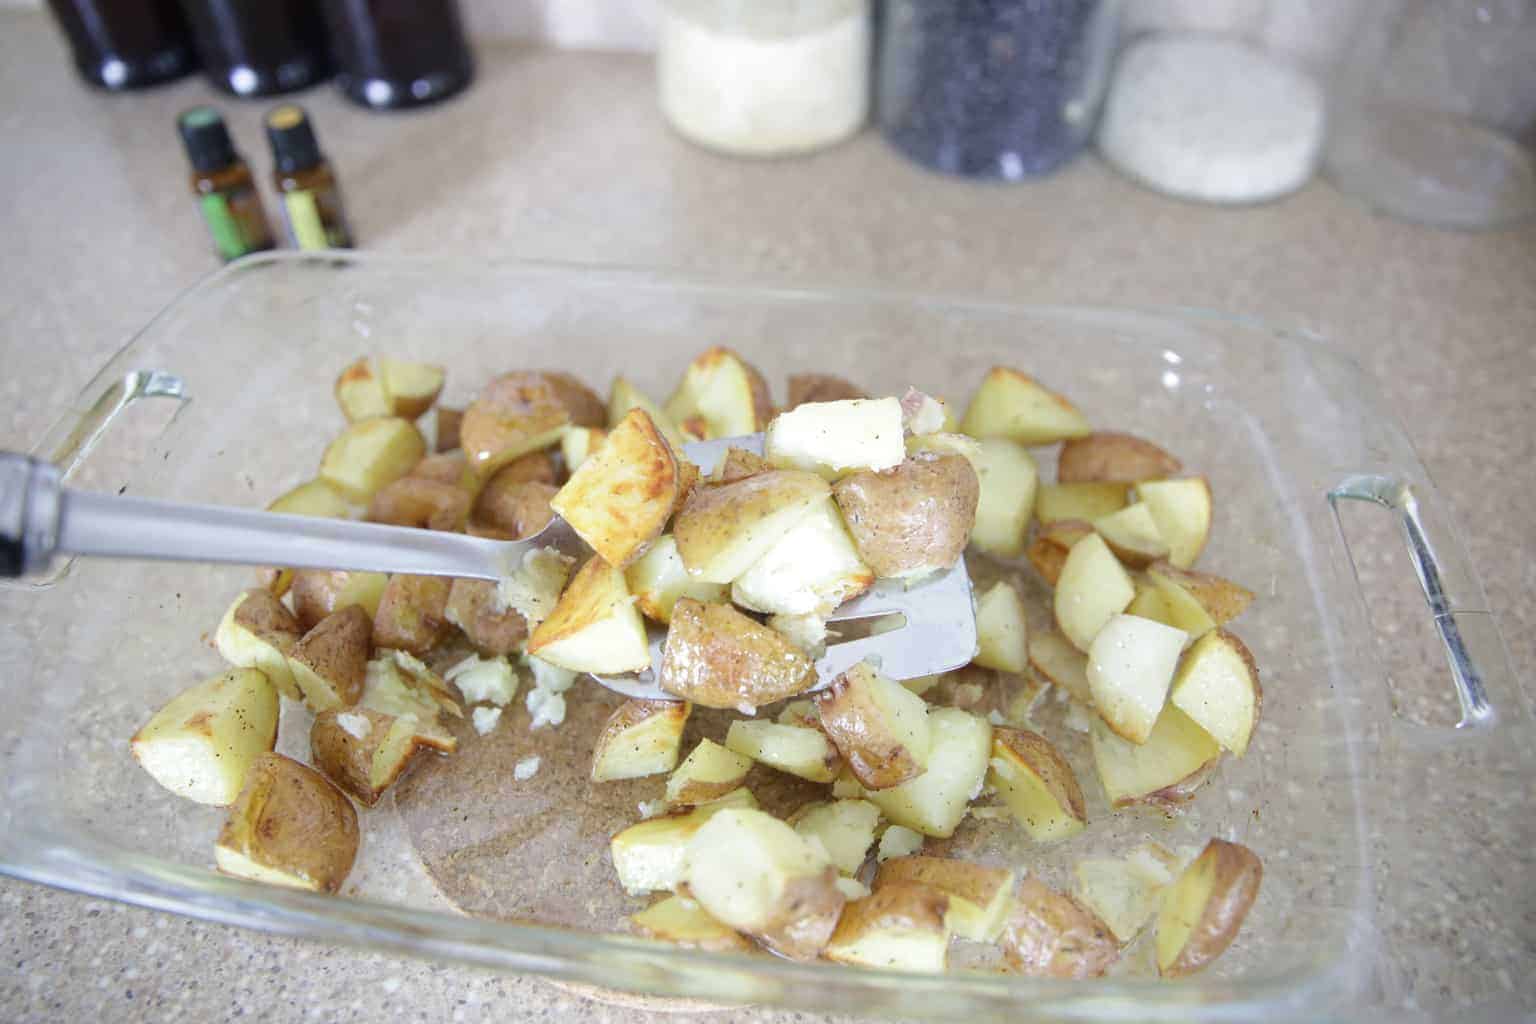 Oven roasted potatoes in glass dish